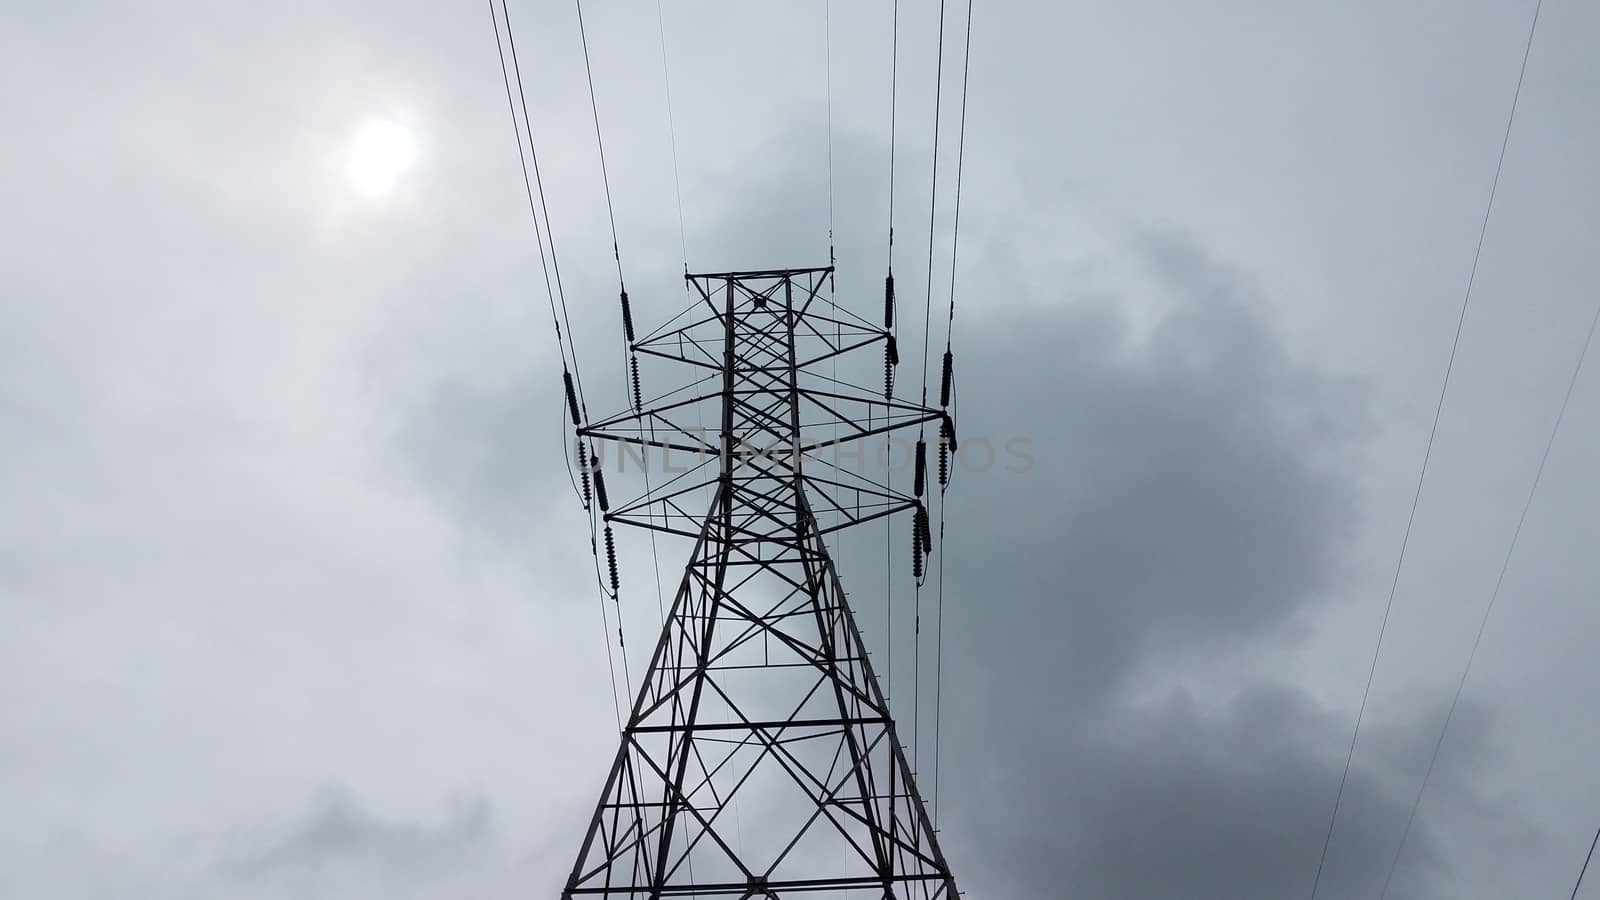 metal tower structure with power or electrical lines and clouds